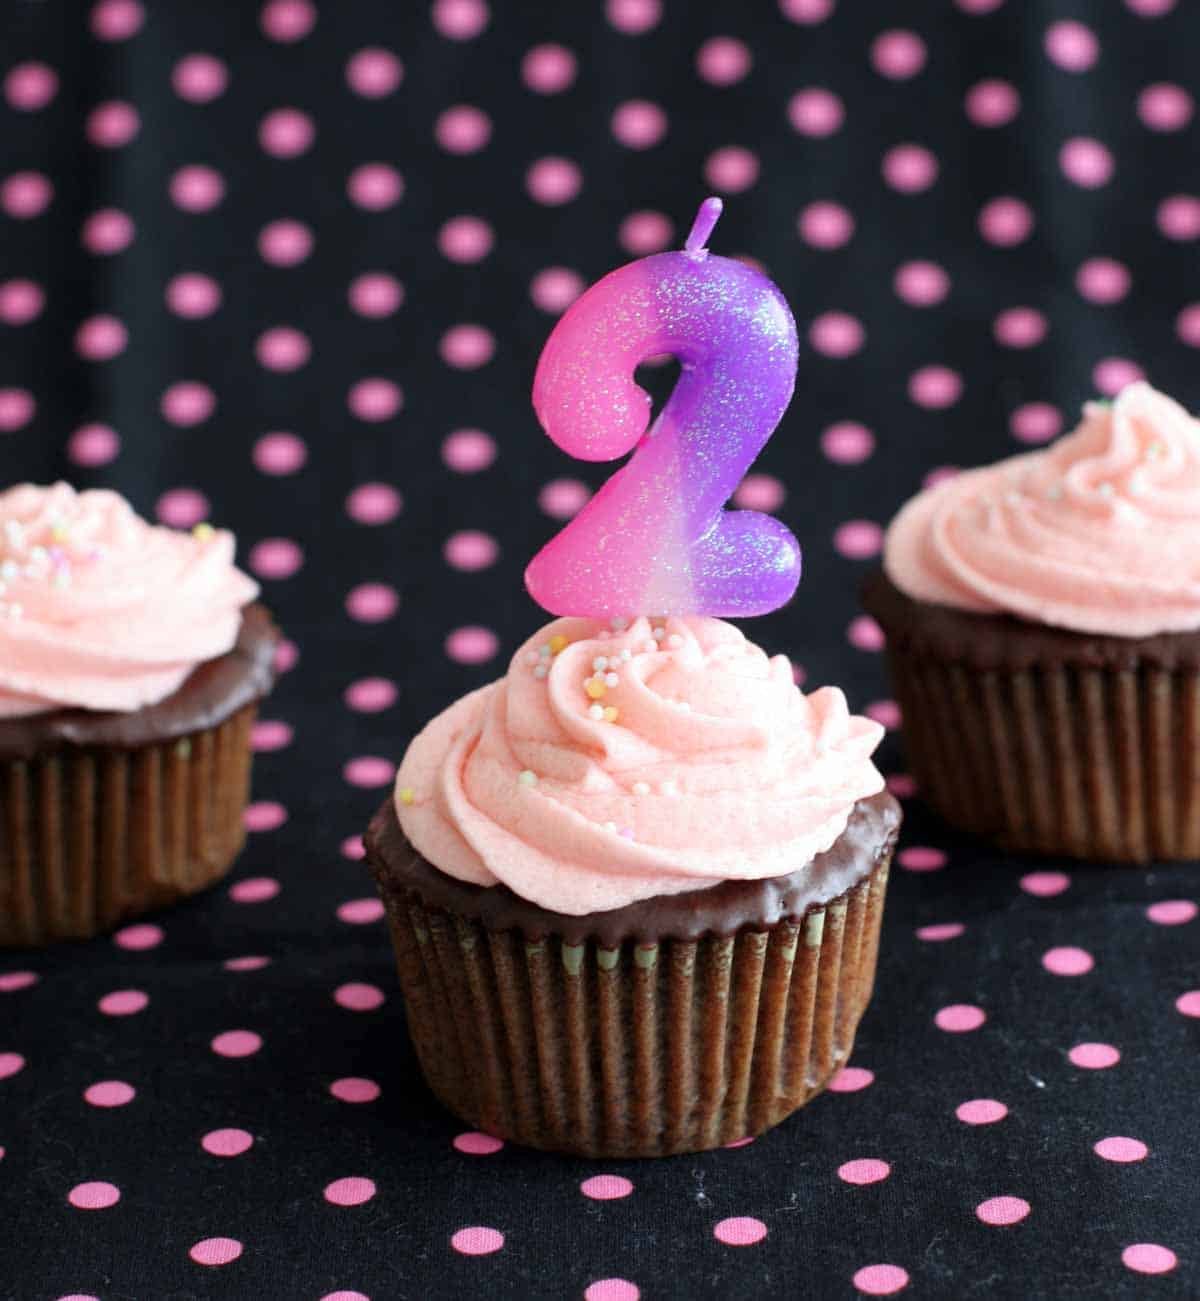 Chocolate cupcakes with buttercream and a number 2 candle